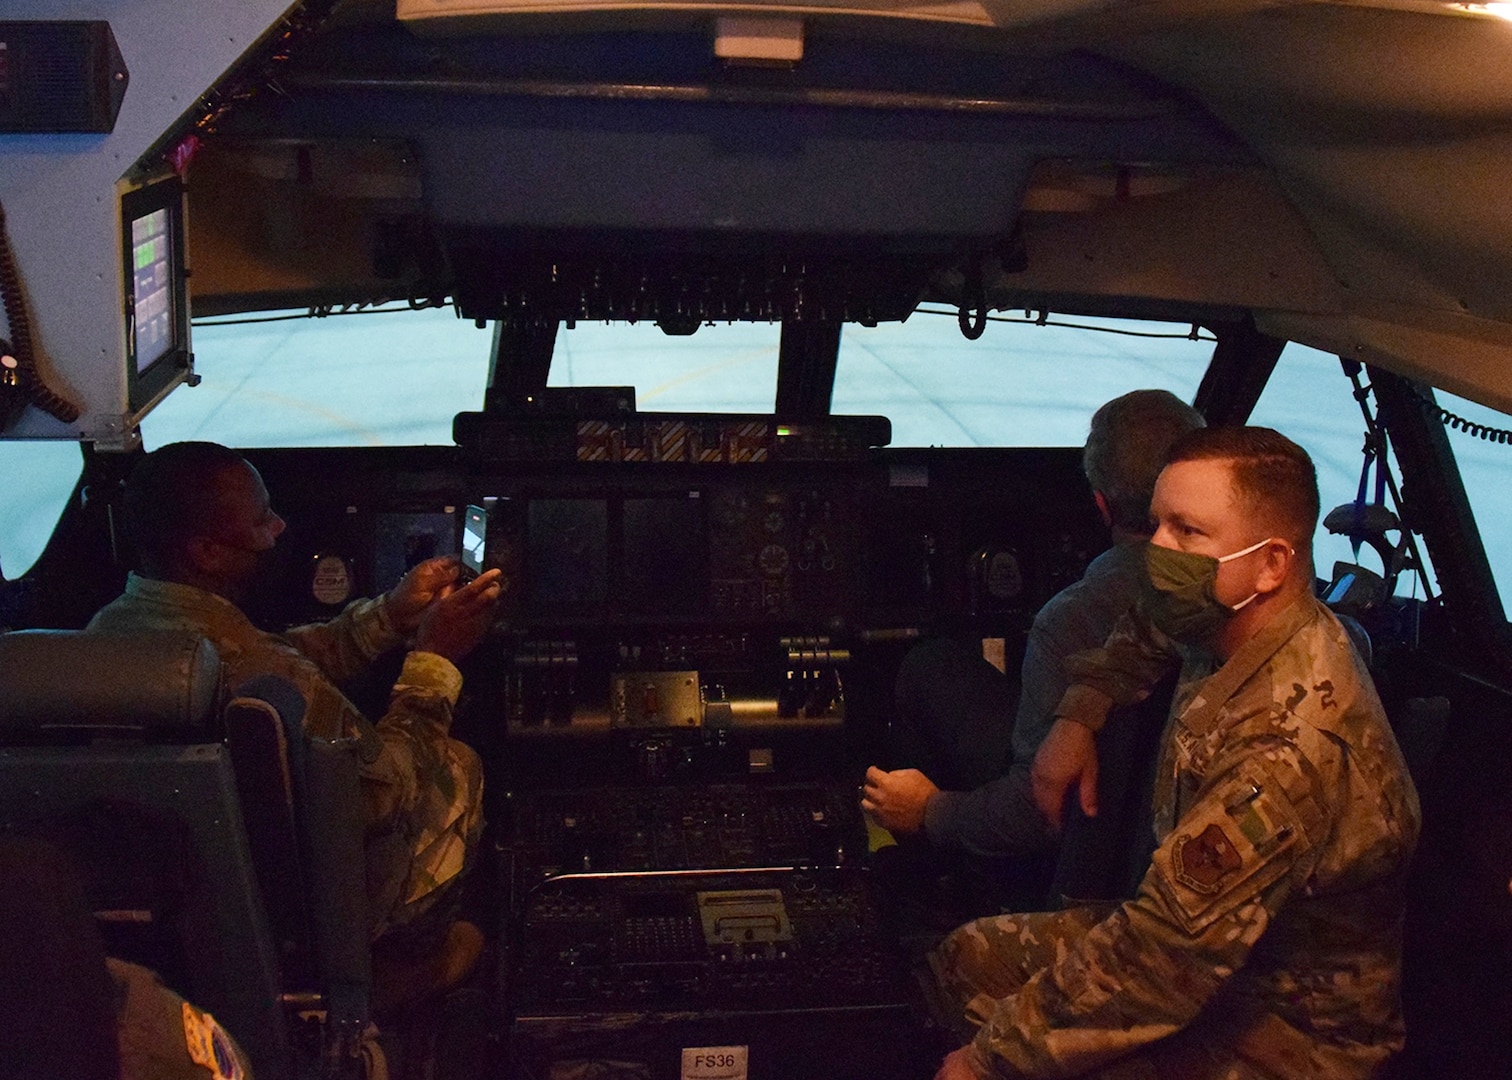 Chief Master Sgt. Carey S. Jordan, 502nd Installation Support Group command chief, Mark J. Tharp, 502nd ISG technical director, and Col. Steven A. Strain, 502nd ISG commander, tour the C-5M Super Galaxy flight simulator at the 433rd Airlift Wing’s flight training facility Oct. 21 at Joint Base San Antonio-Lackland.